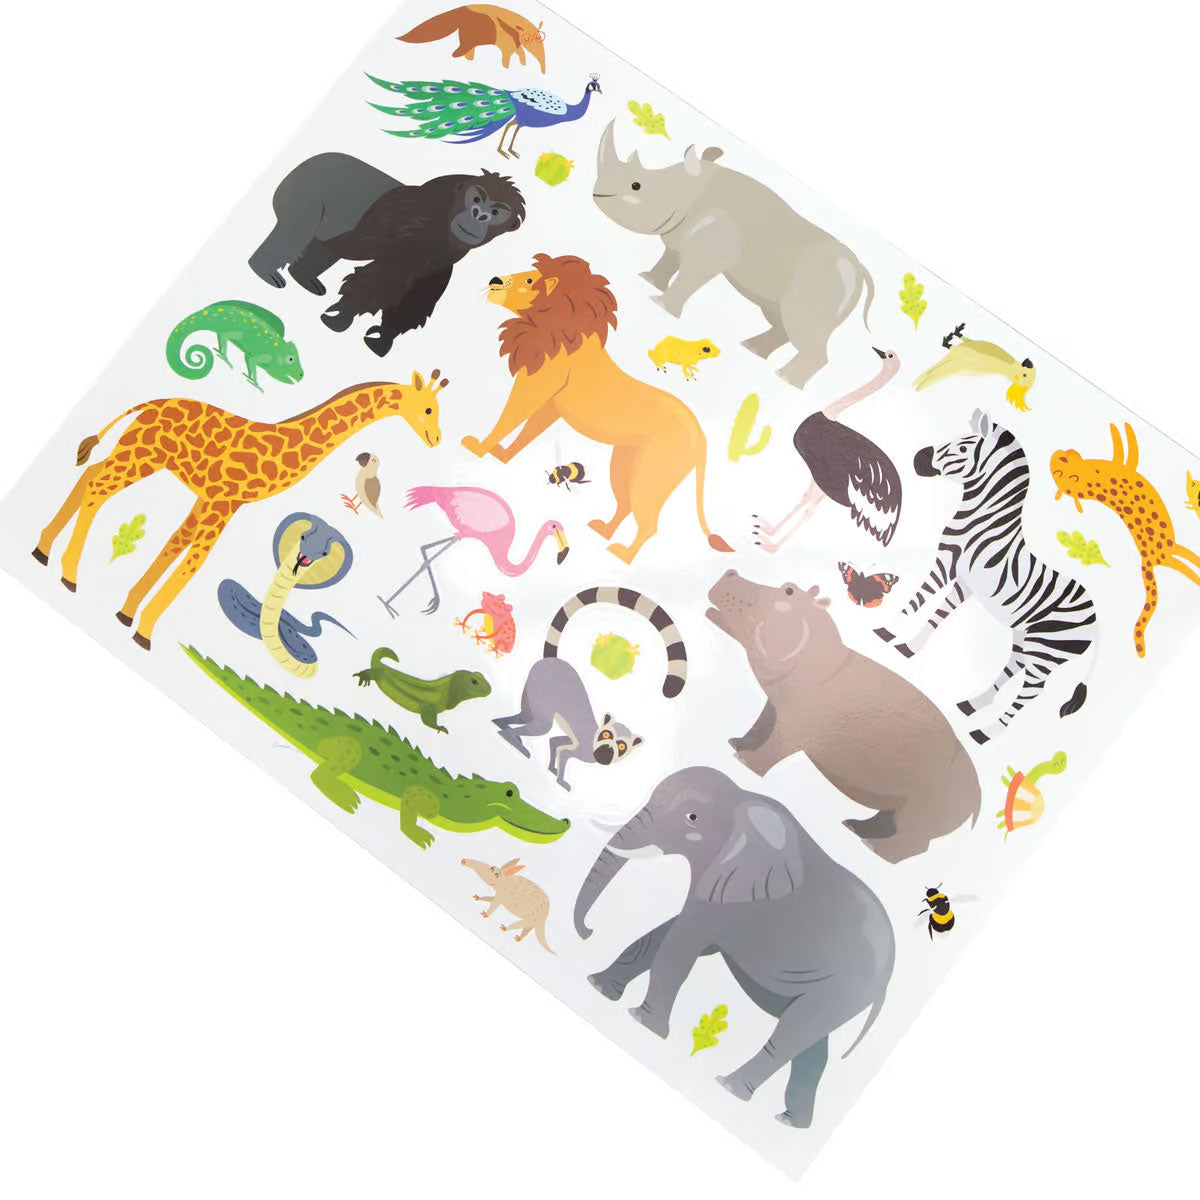 Made By Me Sticker Book Playset - Wild for Animals